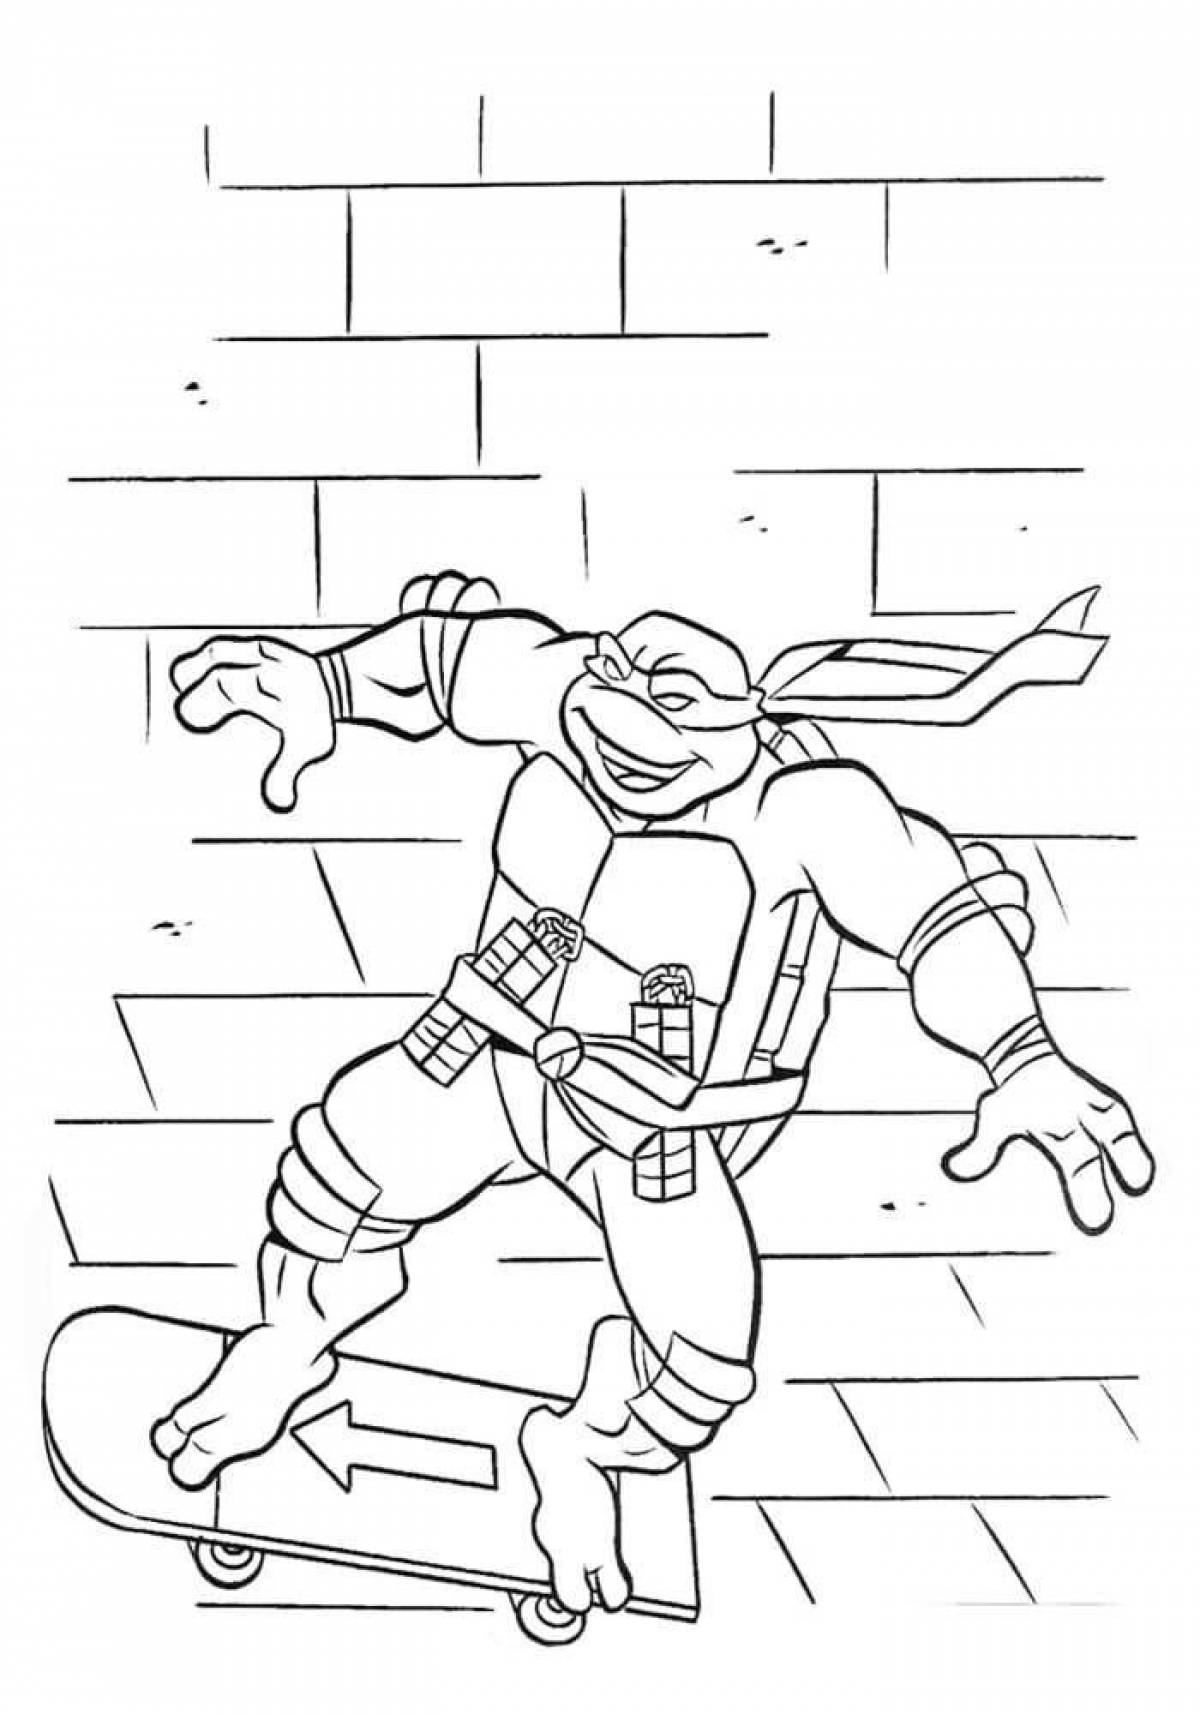 Gorgeous Teenage Mutant Ninja Turtles coloring pages for boys